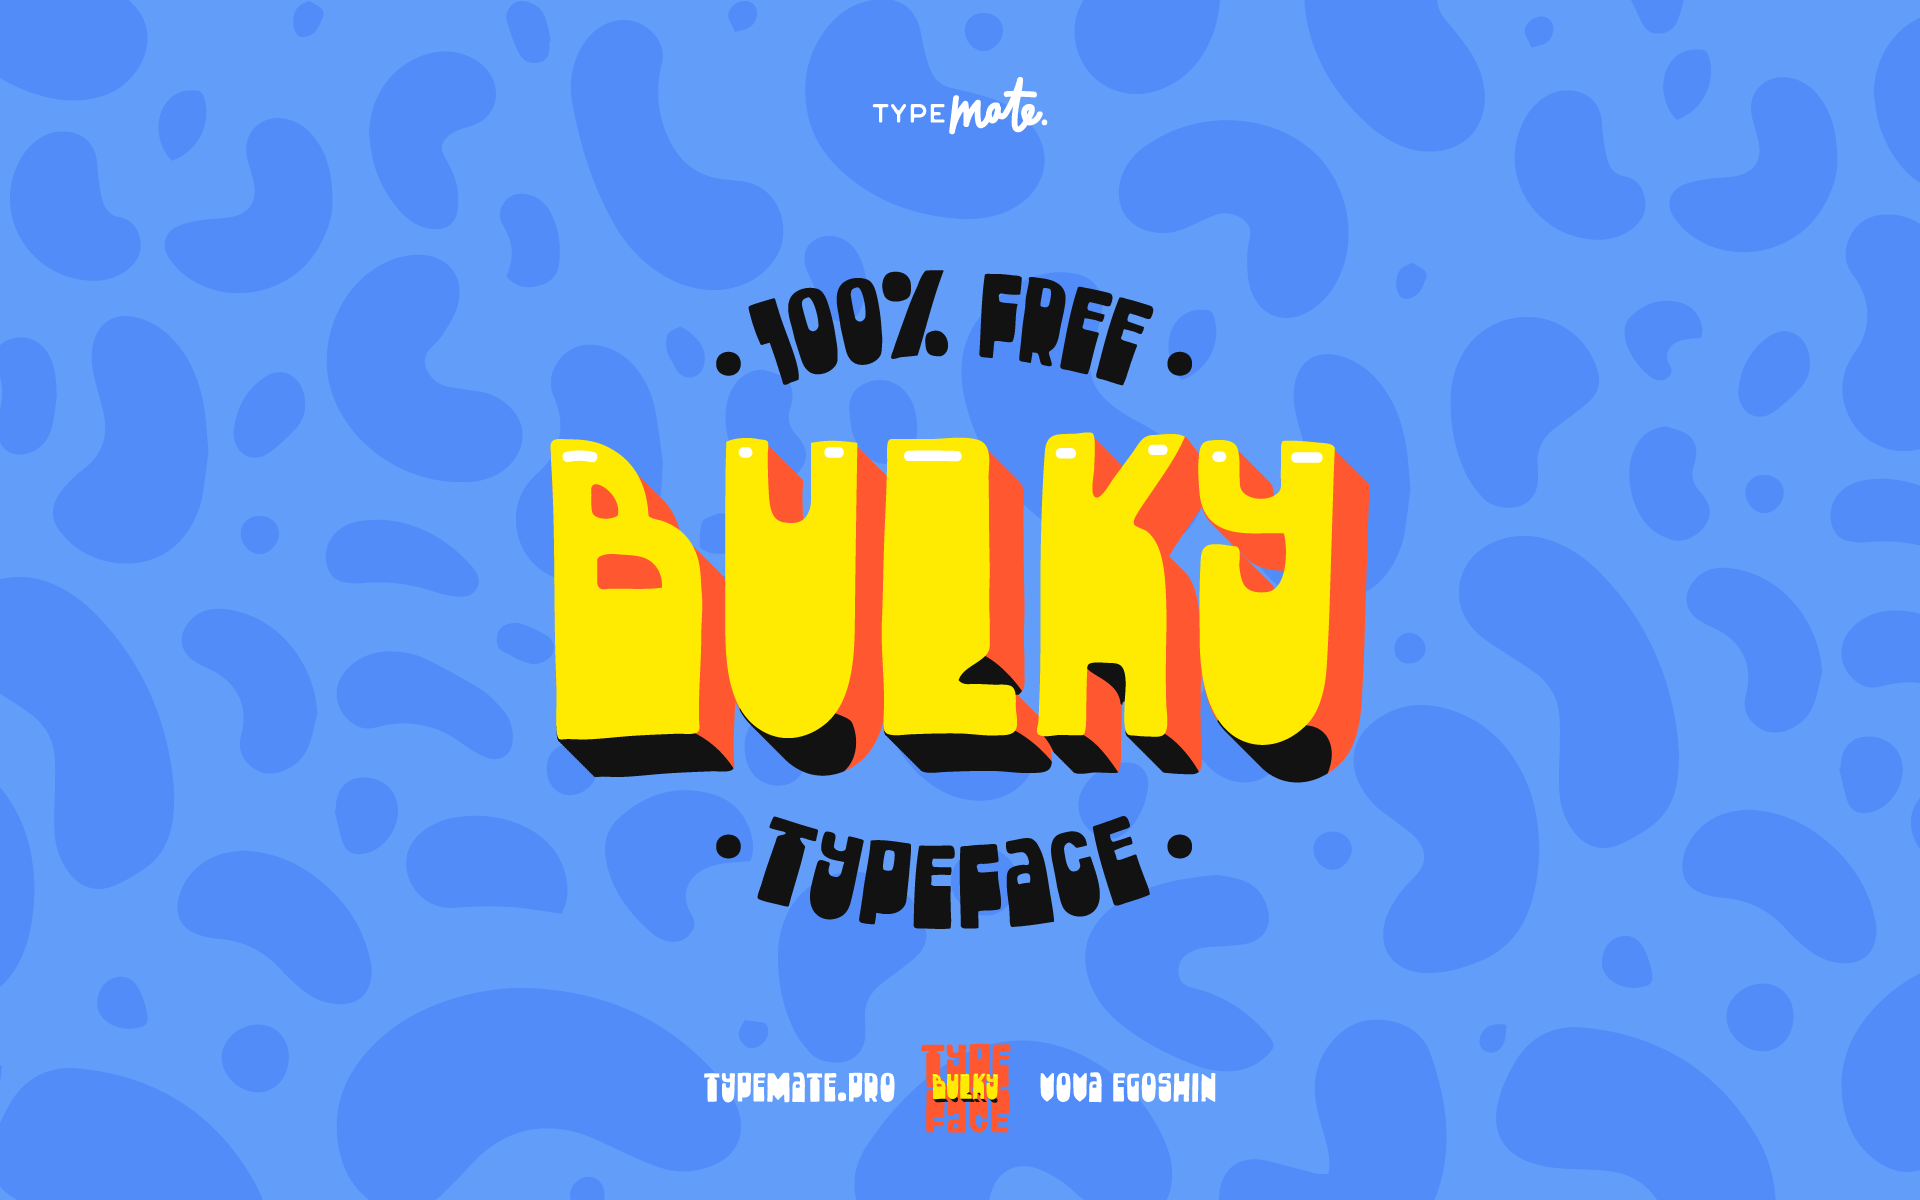 A free bulky typeface